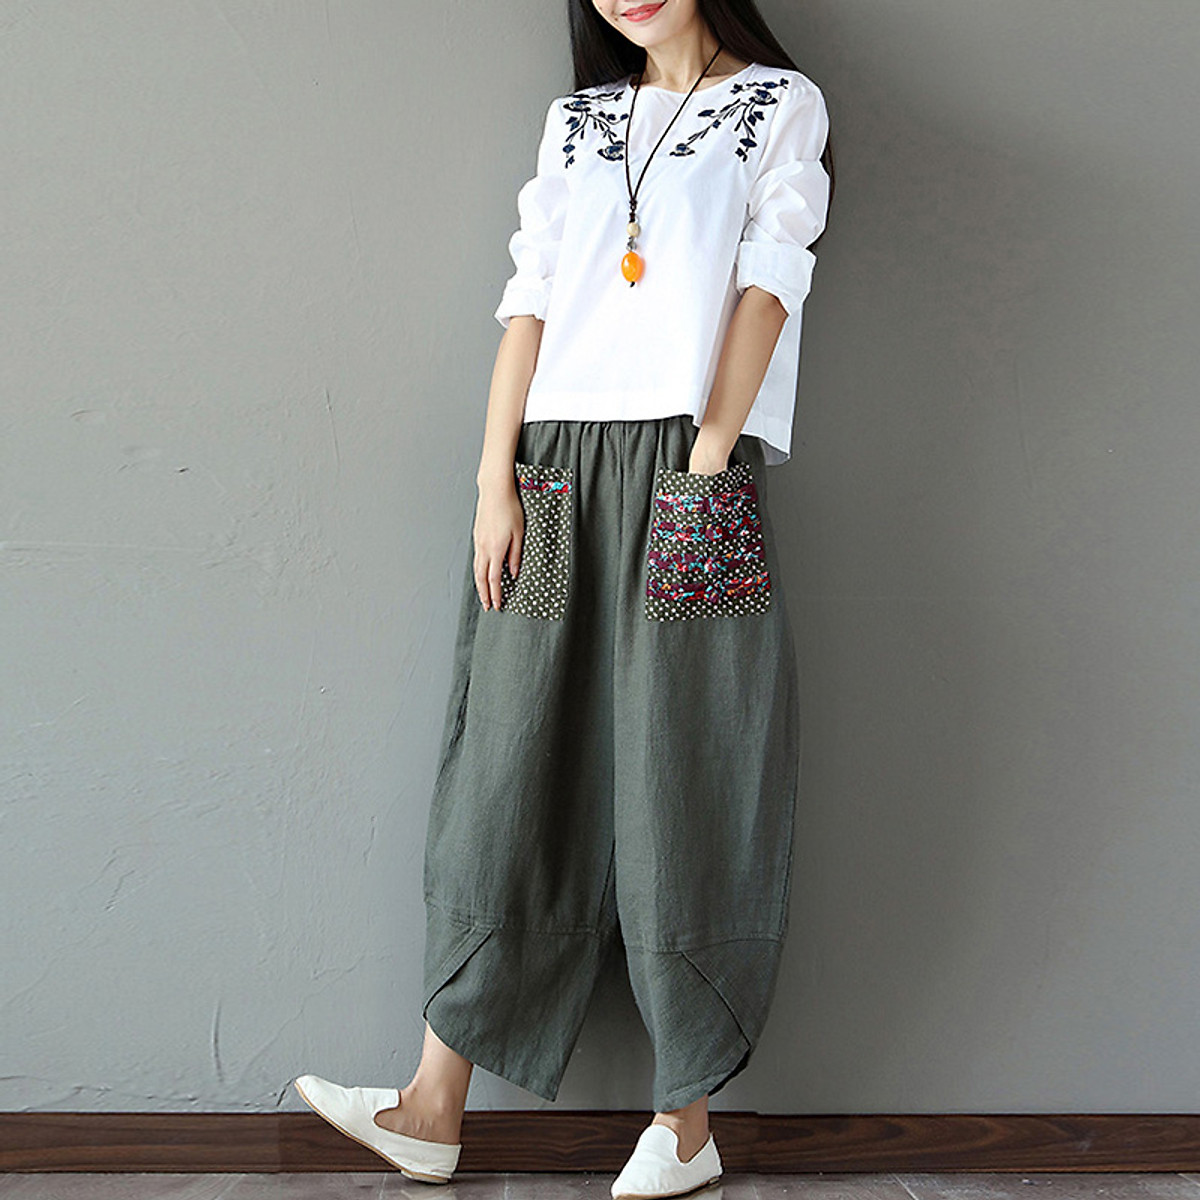 Baggy pants 2 60+ Fashionable '90s Ladies Outfit Ideas That Come Back - 20